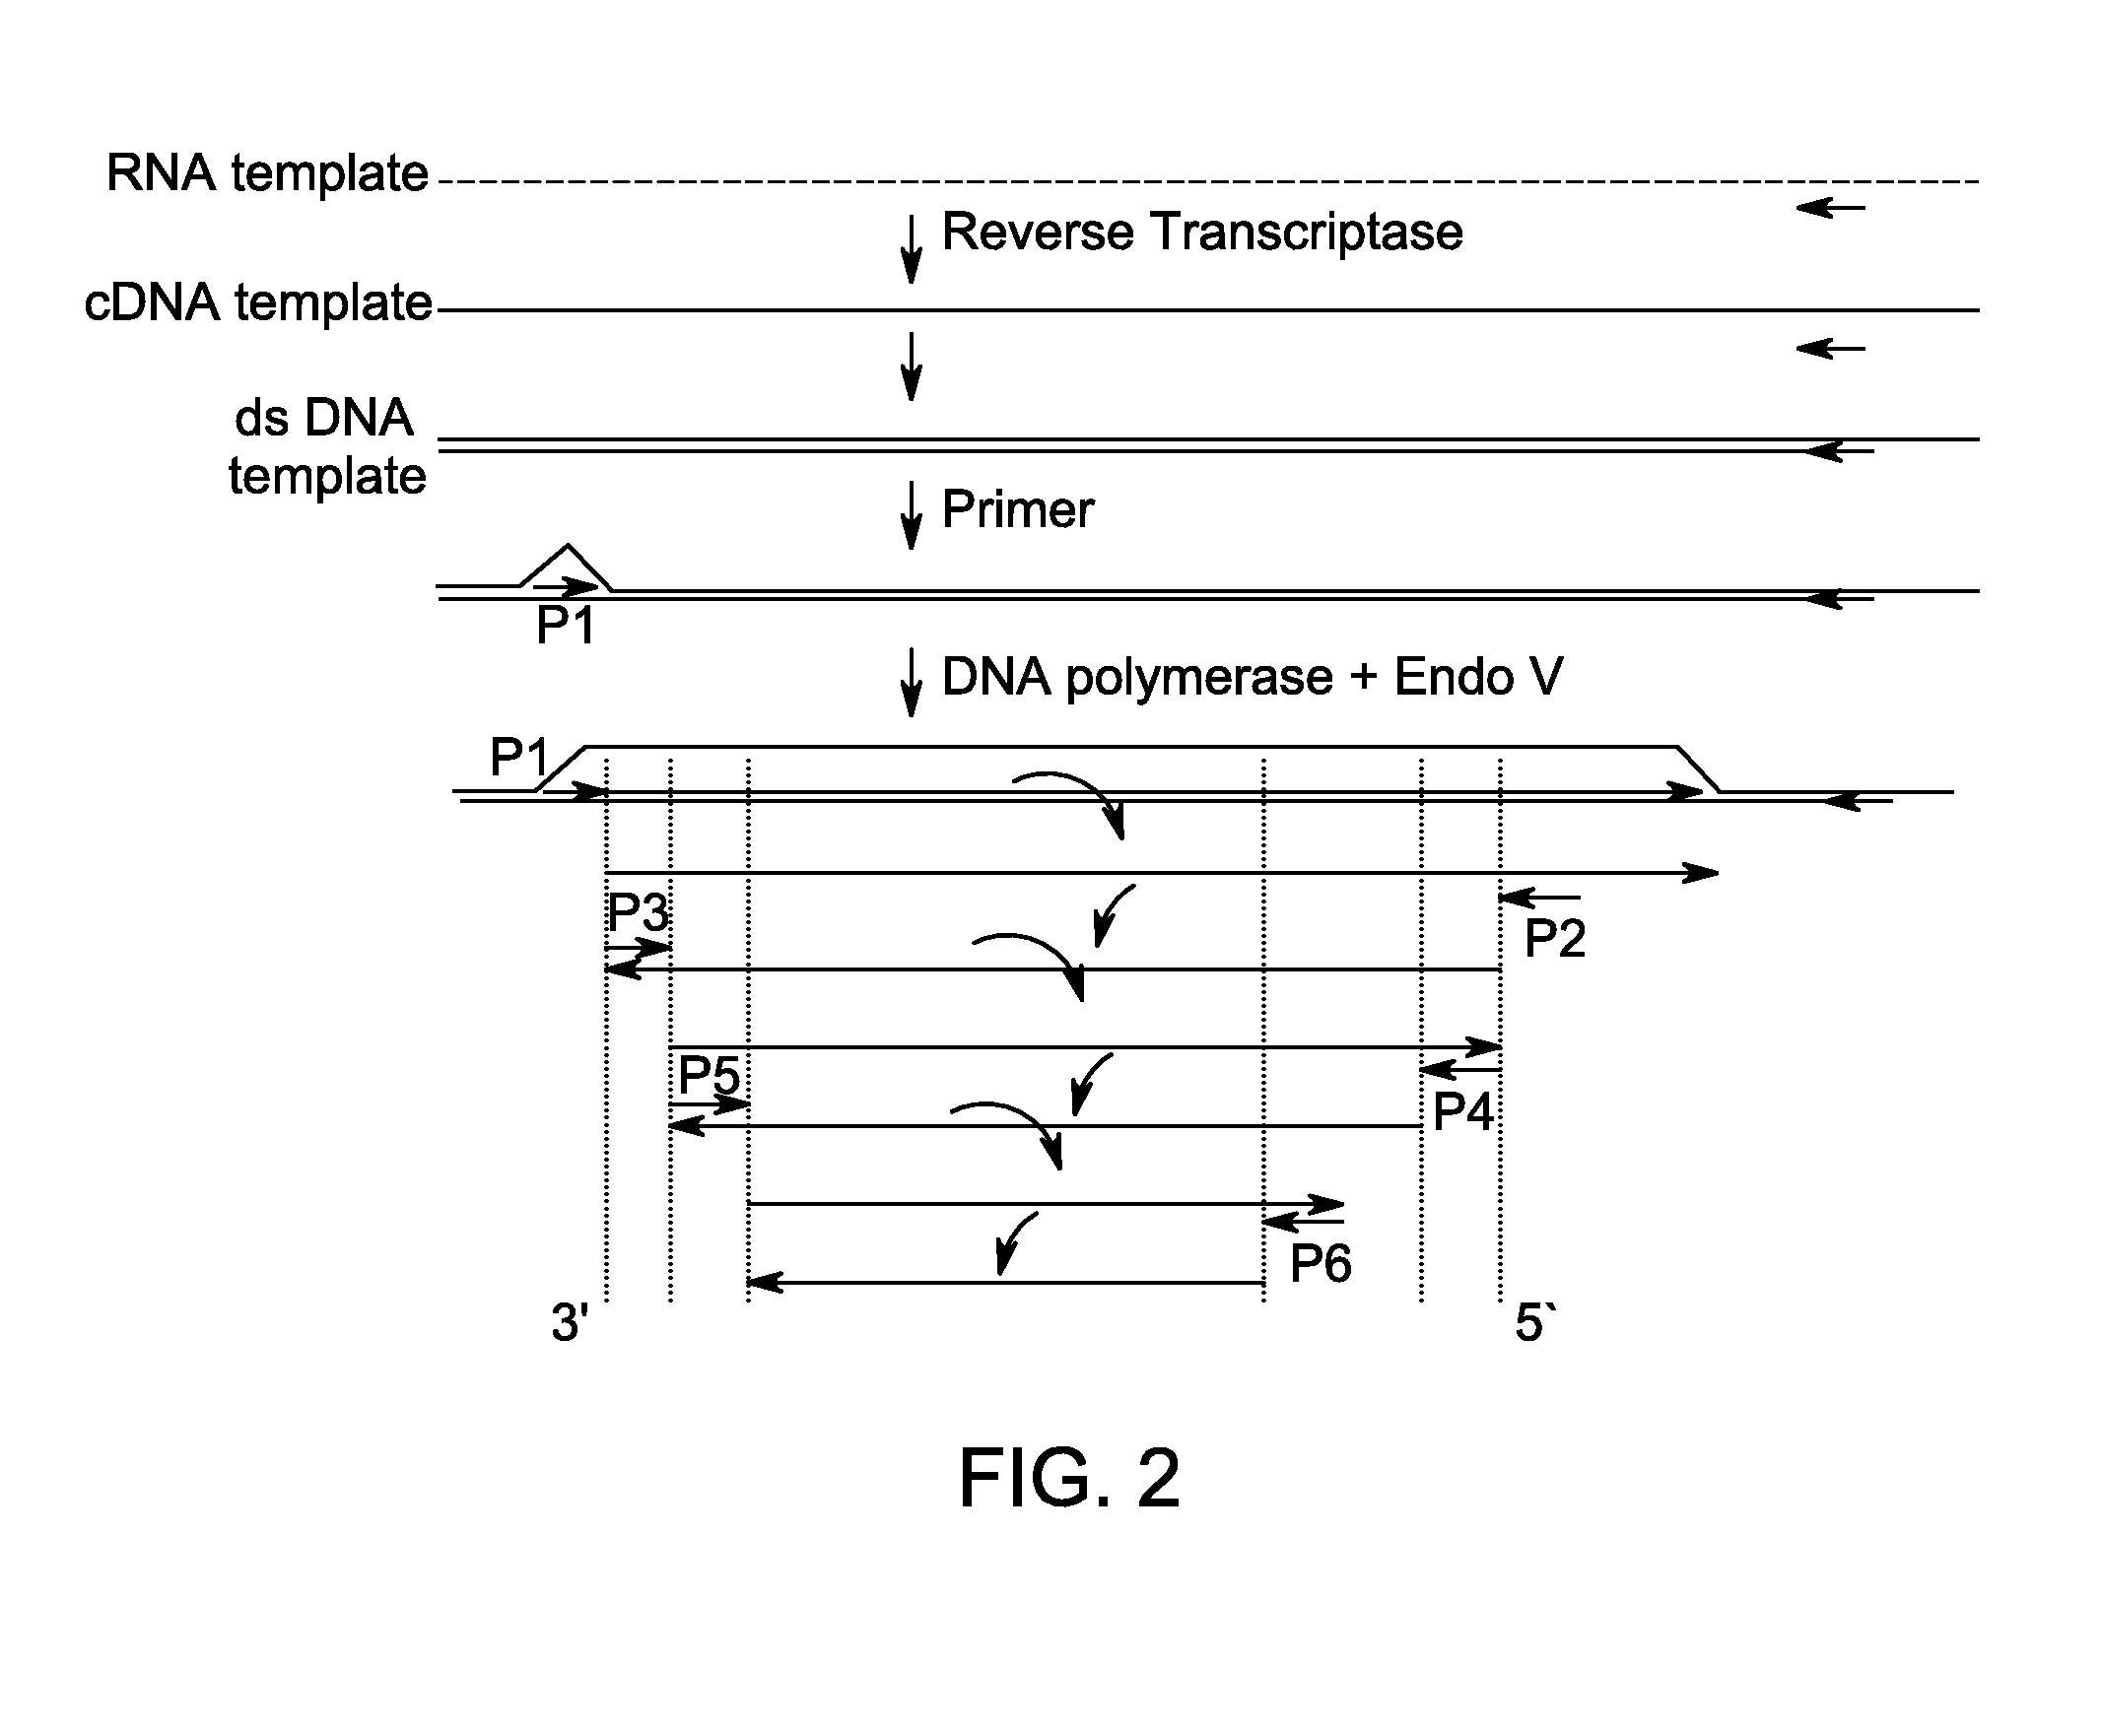 Method for isothermal DNA amplification starting from an RNA template